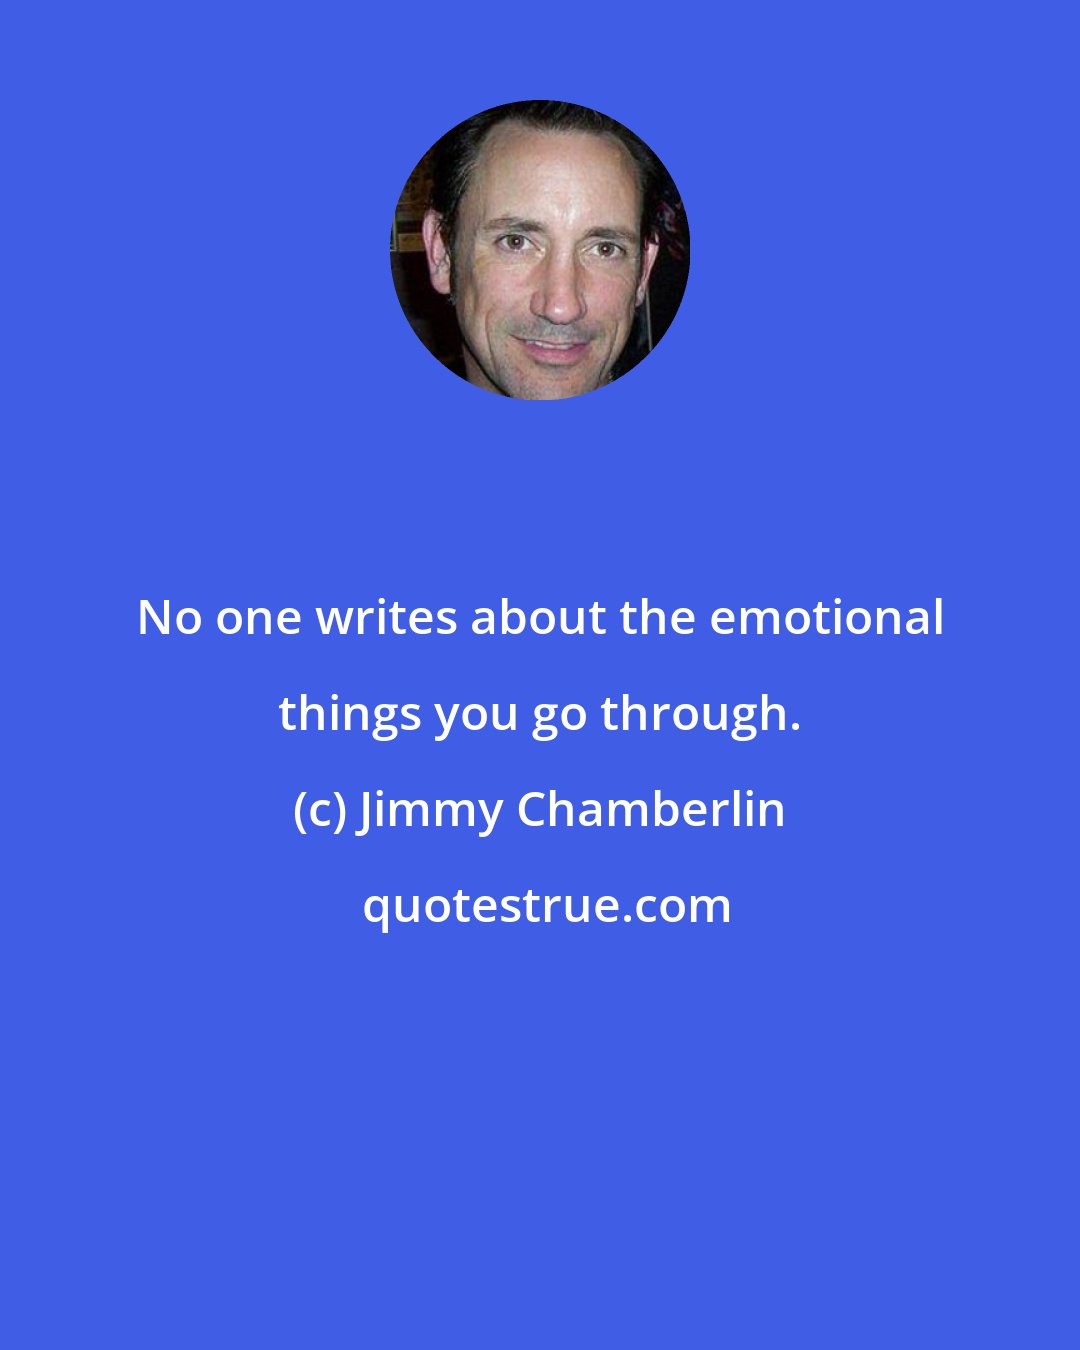 Jimmy Chamberlin: No one writes about the emotional things you go through.